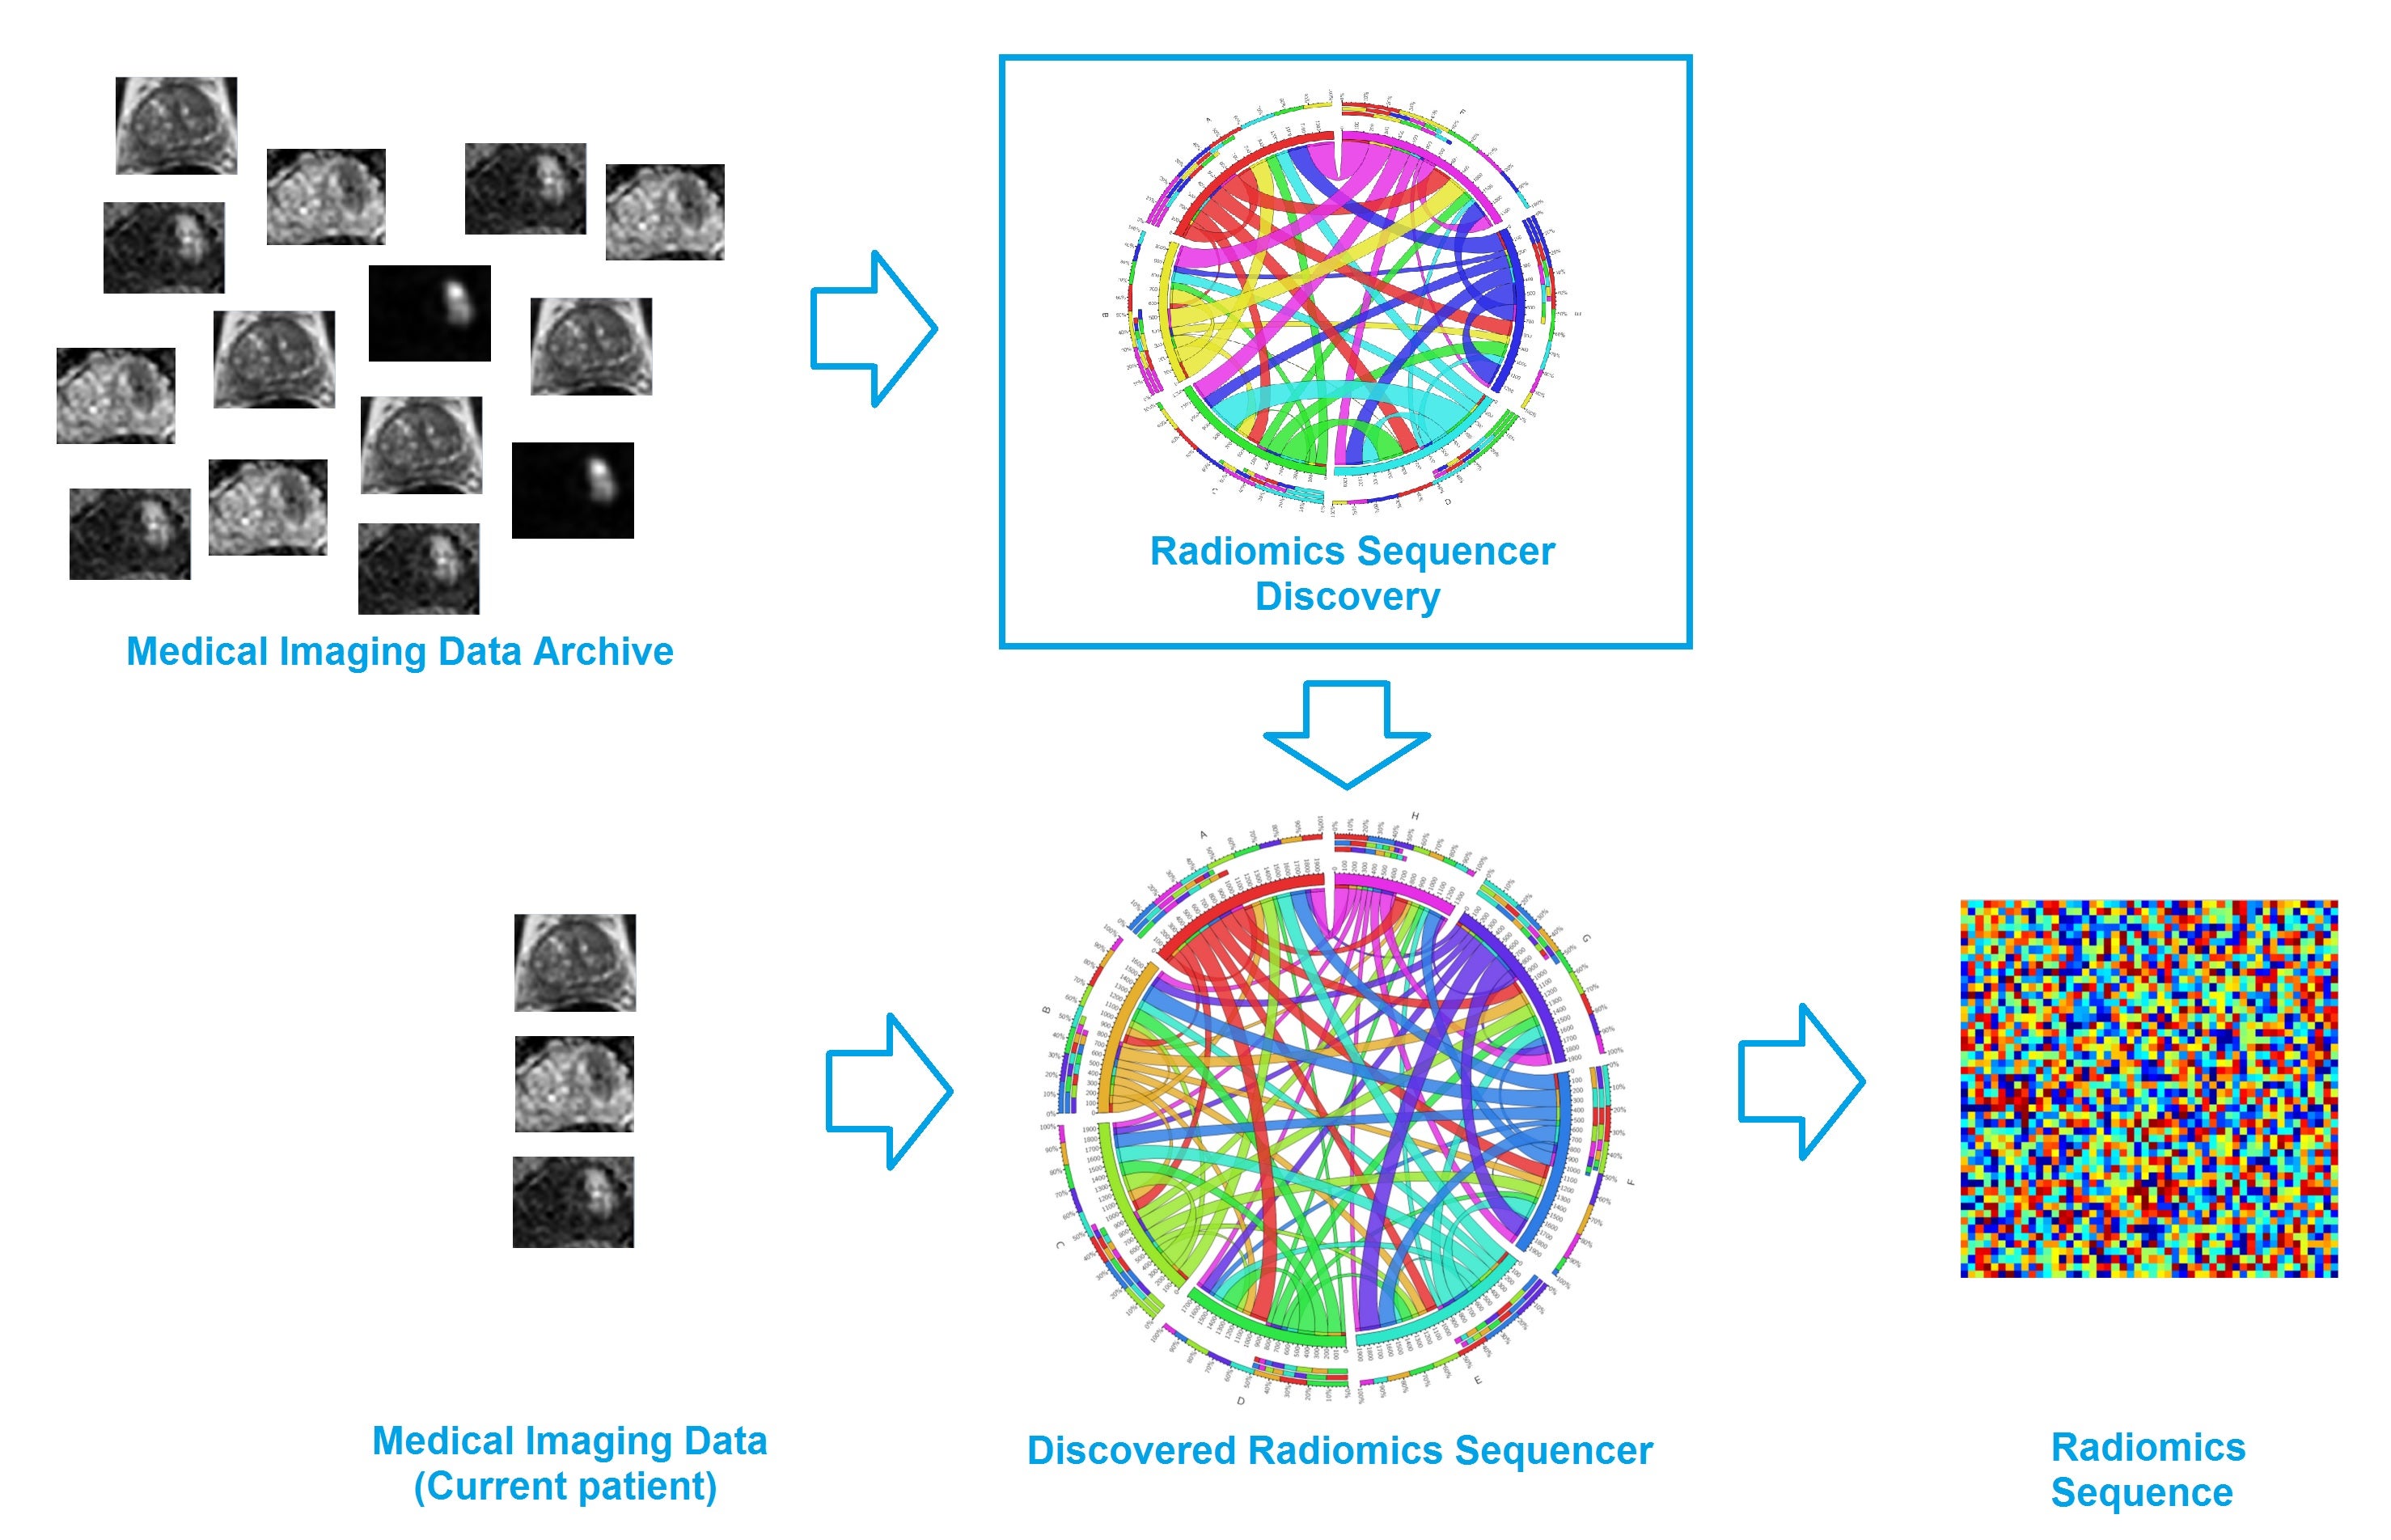 The discovery radiomics framework - first, a wealth of standardized medical imaging data from past patients are fed into the radiomics sequencer discovery engine, where a customized radiomics sequencer is constructed based on a large number of radiomics features that were discovered to capture highly unique tumor traits and characteristics. Second, for a new patient case, the discovered radiomics sequencer is then used to extract a wealth of customized, tailored imaging-based features from the medical imaging data of the new patient case for comprehensive, custom quantification of the tumor phenotype.